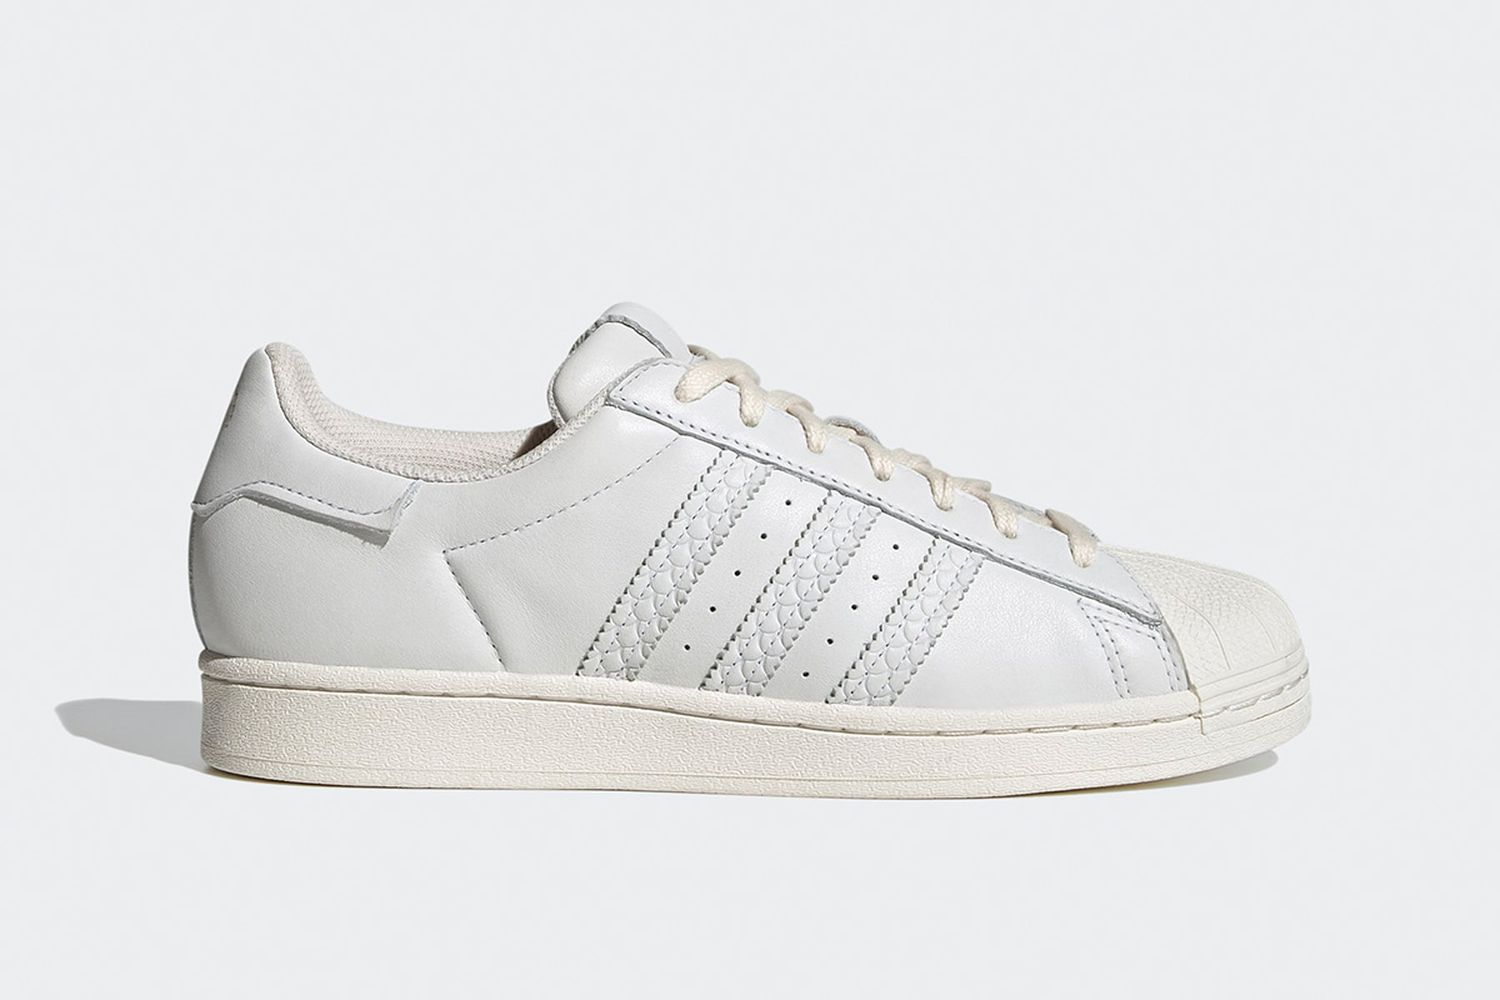 Shop Our Picks from the adidas Here